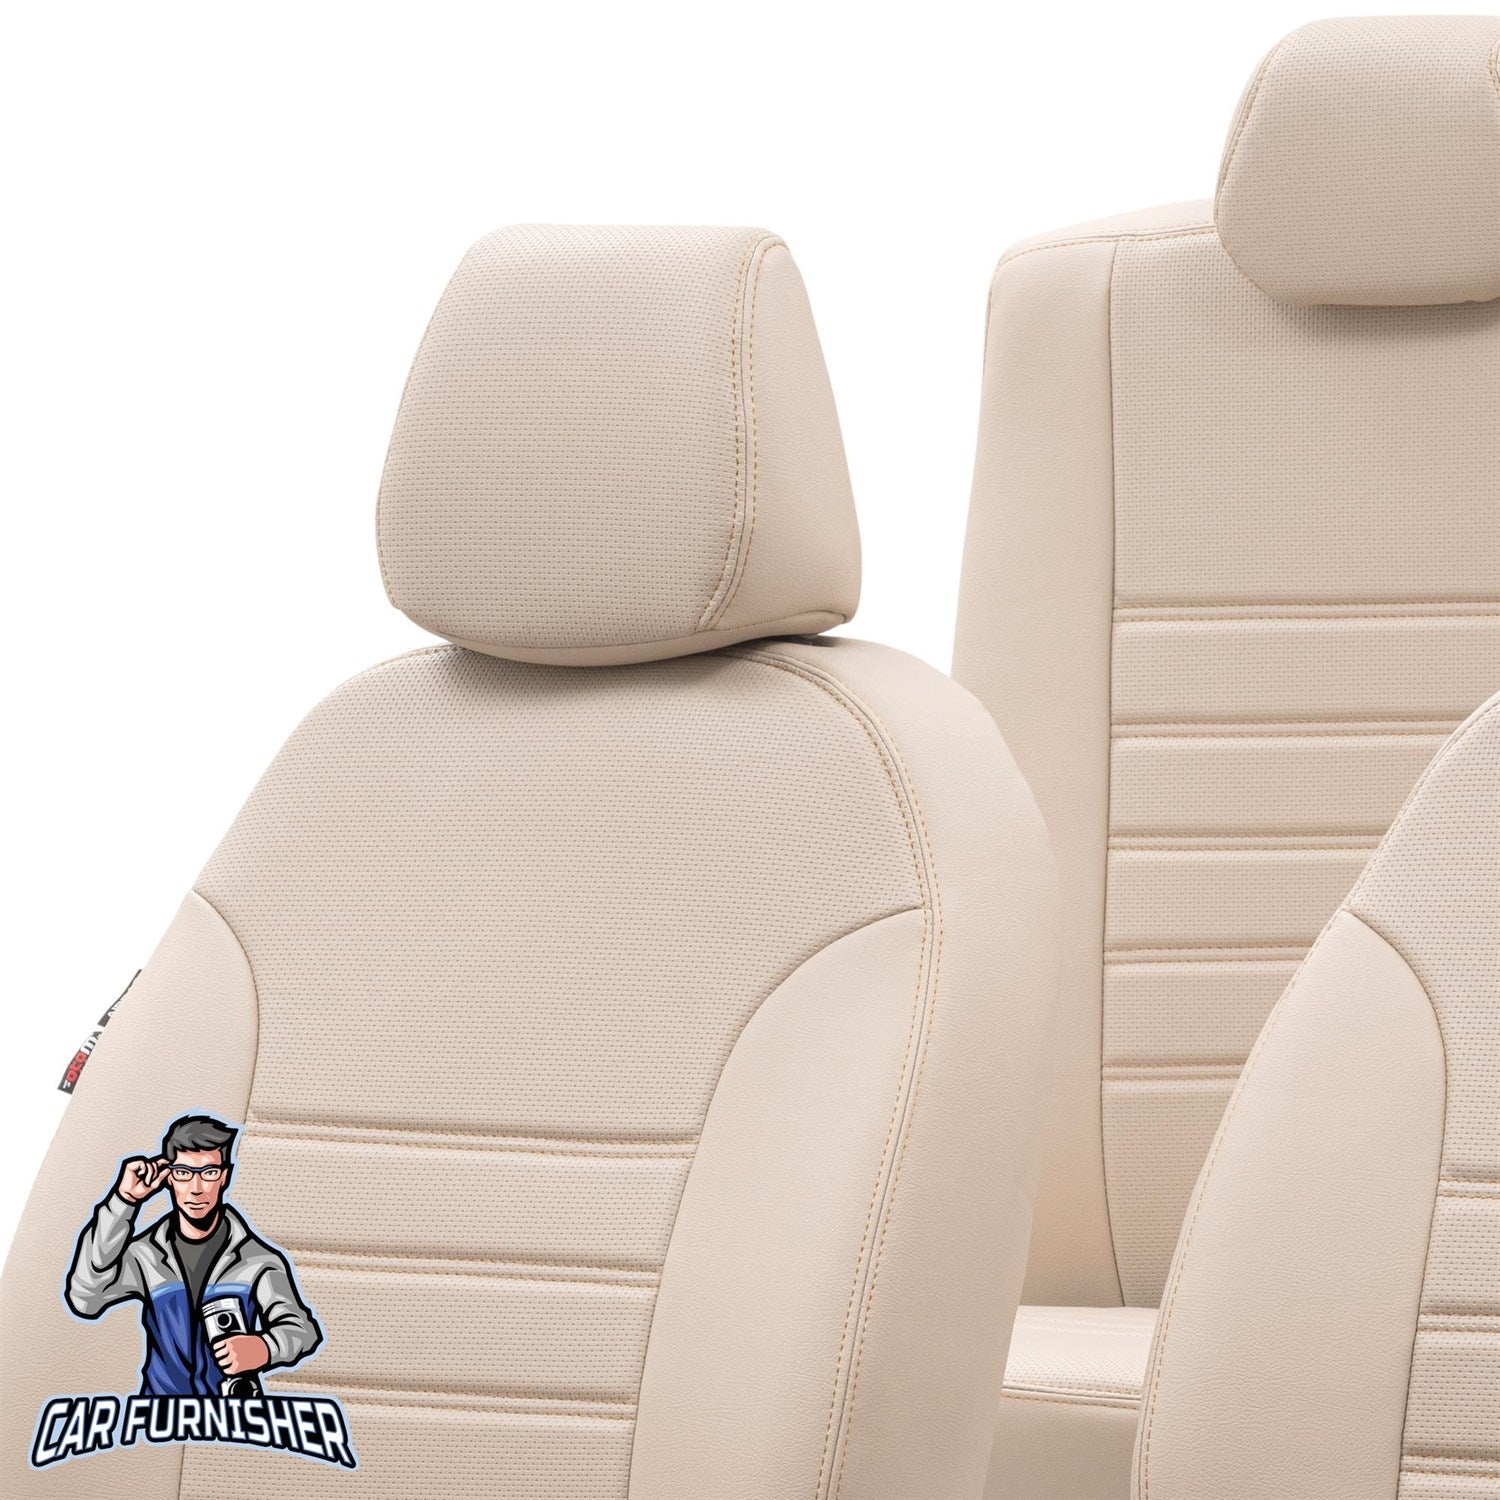 Nissan Skystar Seat Covers New York Leather Design Beige Leather